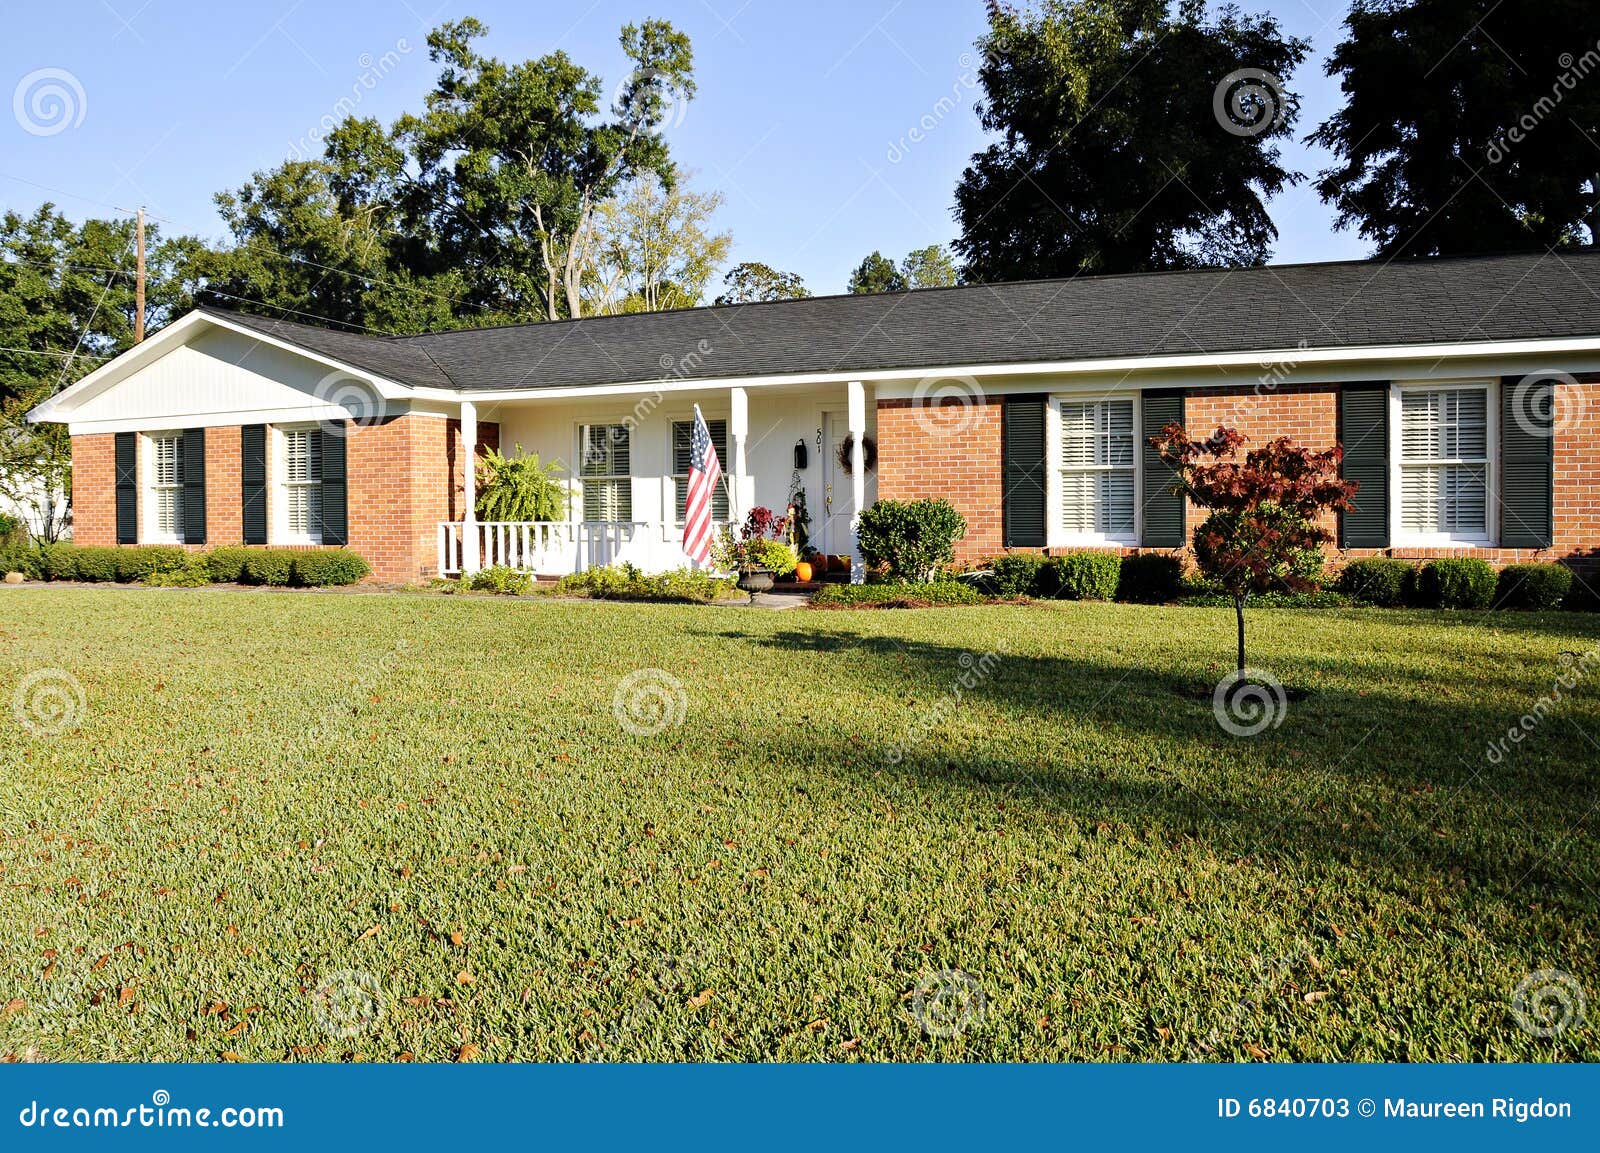  American Ranch Style  Brick Home Stock Photography 